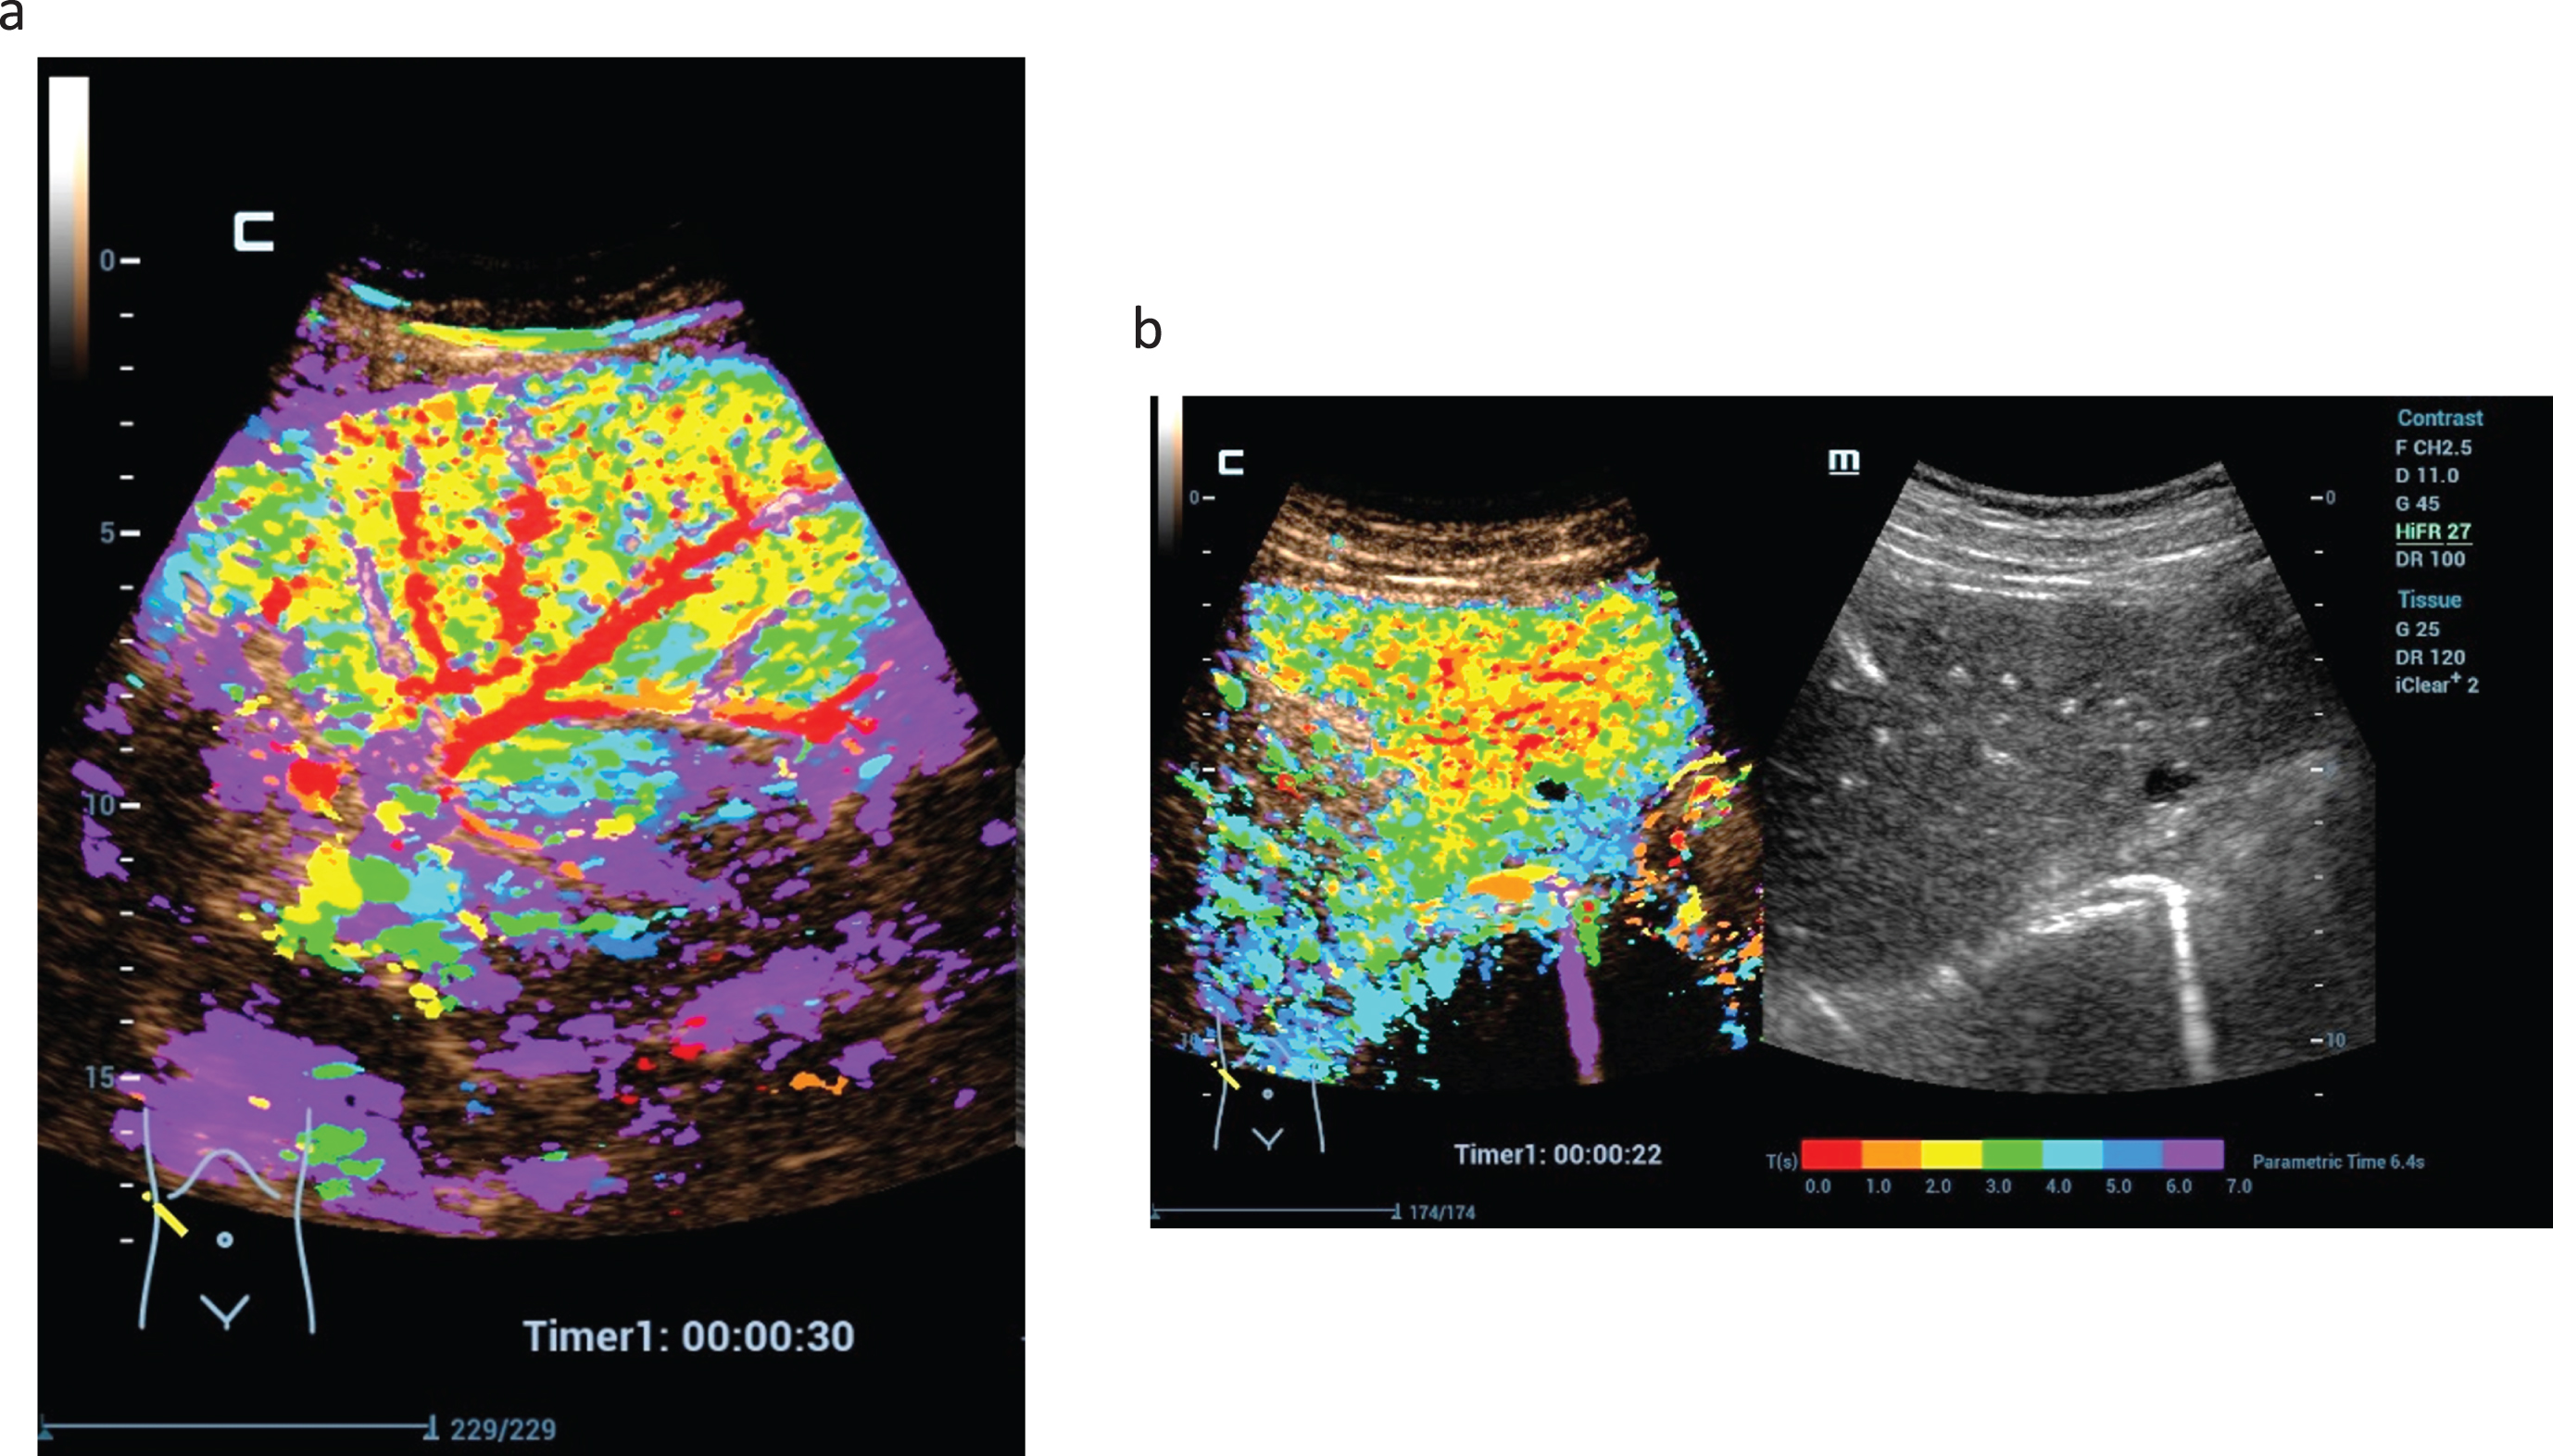 Possibilities of parametric evaluation of dynamic CEUS by false colors of dynamic arterial microvascularization of the liver. By red color detection of early enhancement of vascular structures (a) and hyperenhancement of a tumor lesion by red, orange and yellow color maps, not detectable by the fundamental B-mode (b).